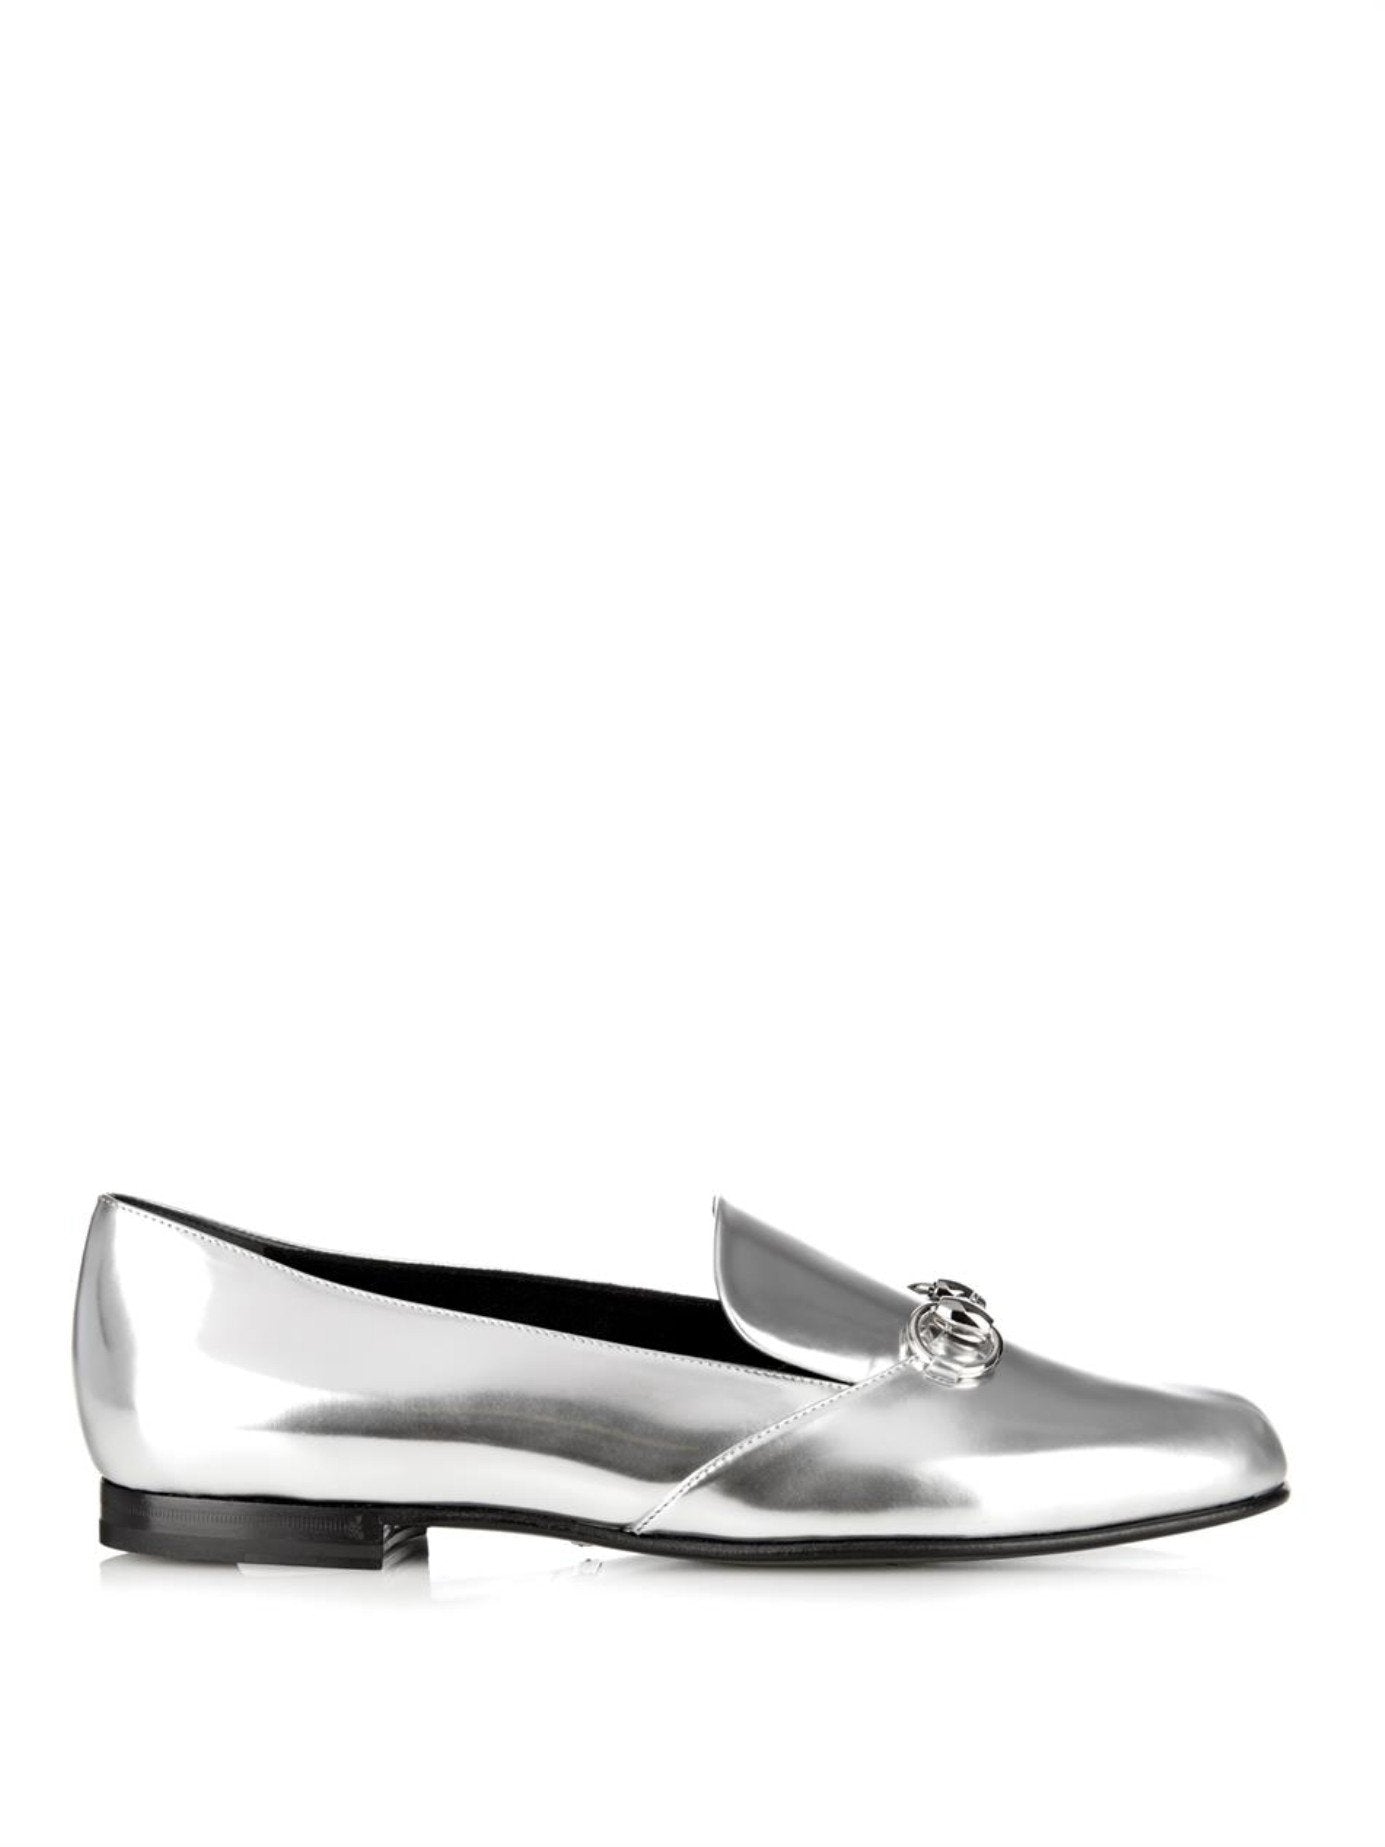 THE METALLIC LOAFERS - SILVER / METALLIC - Shoes - COS